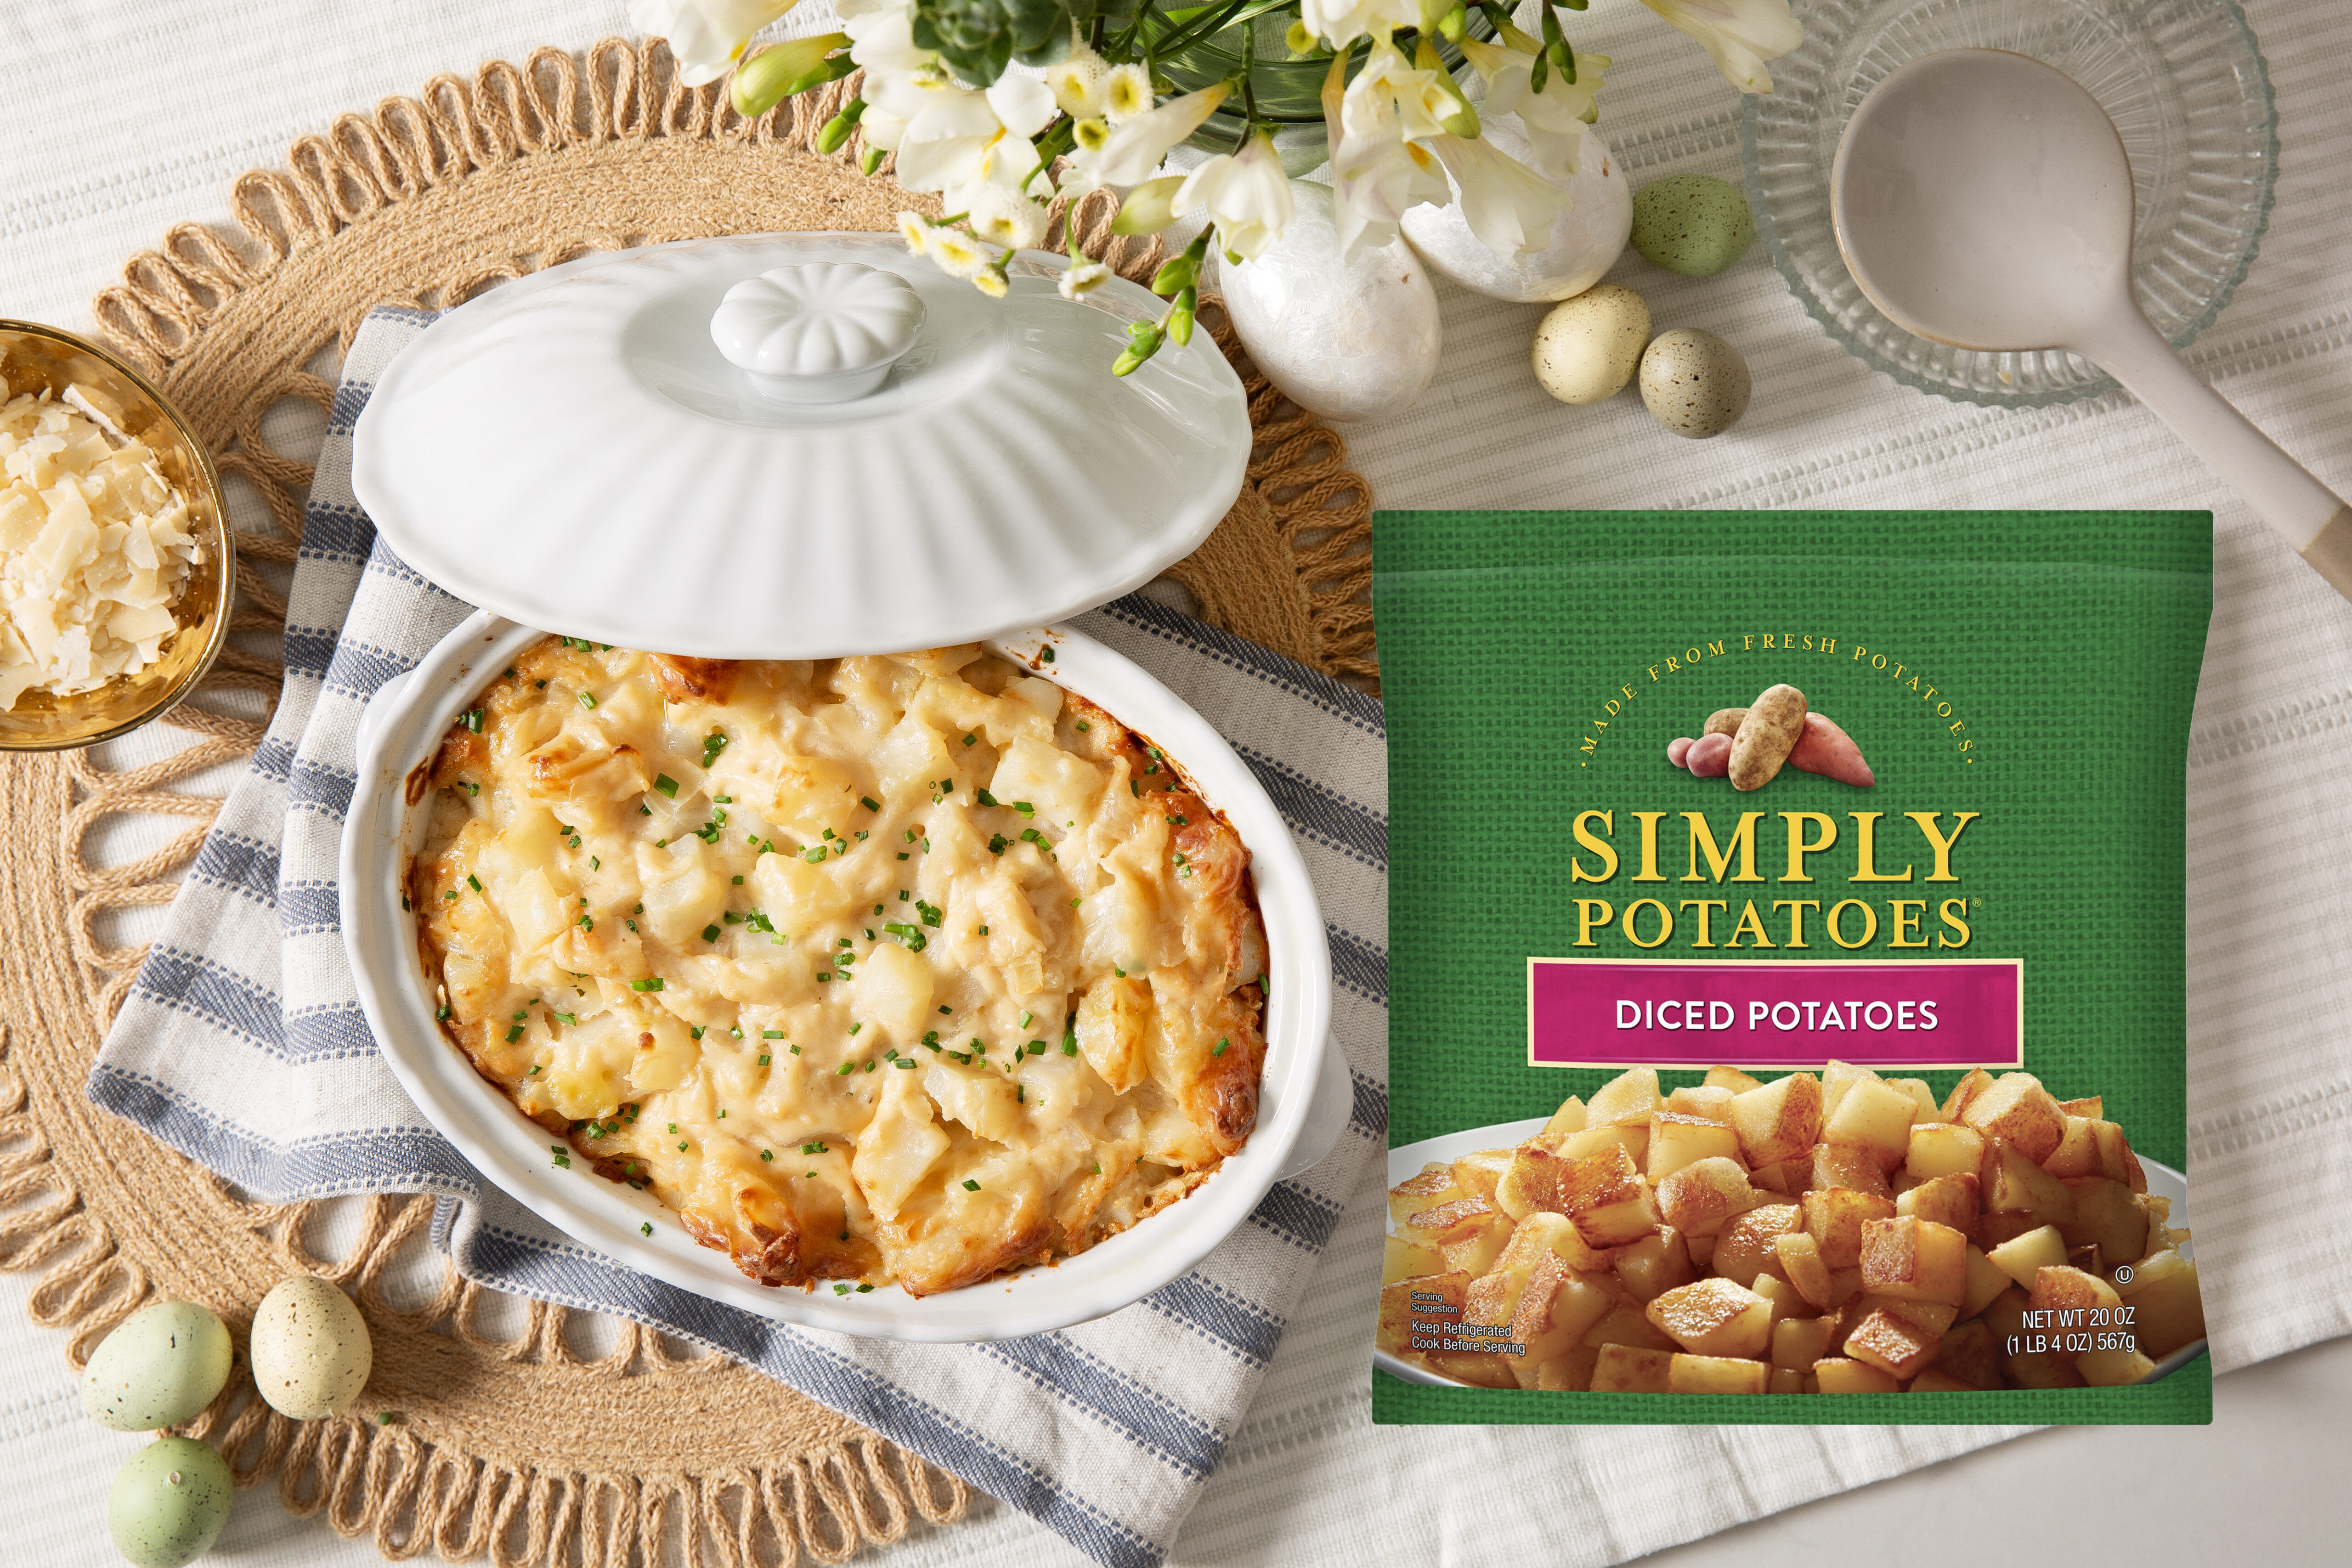 4-cheese potato casserole next to a package of Simply Potatoes Diced Potatoes